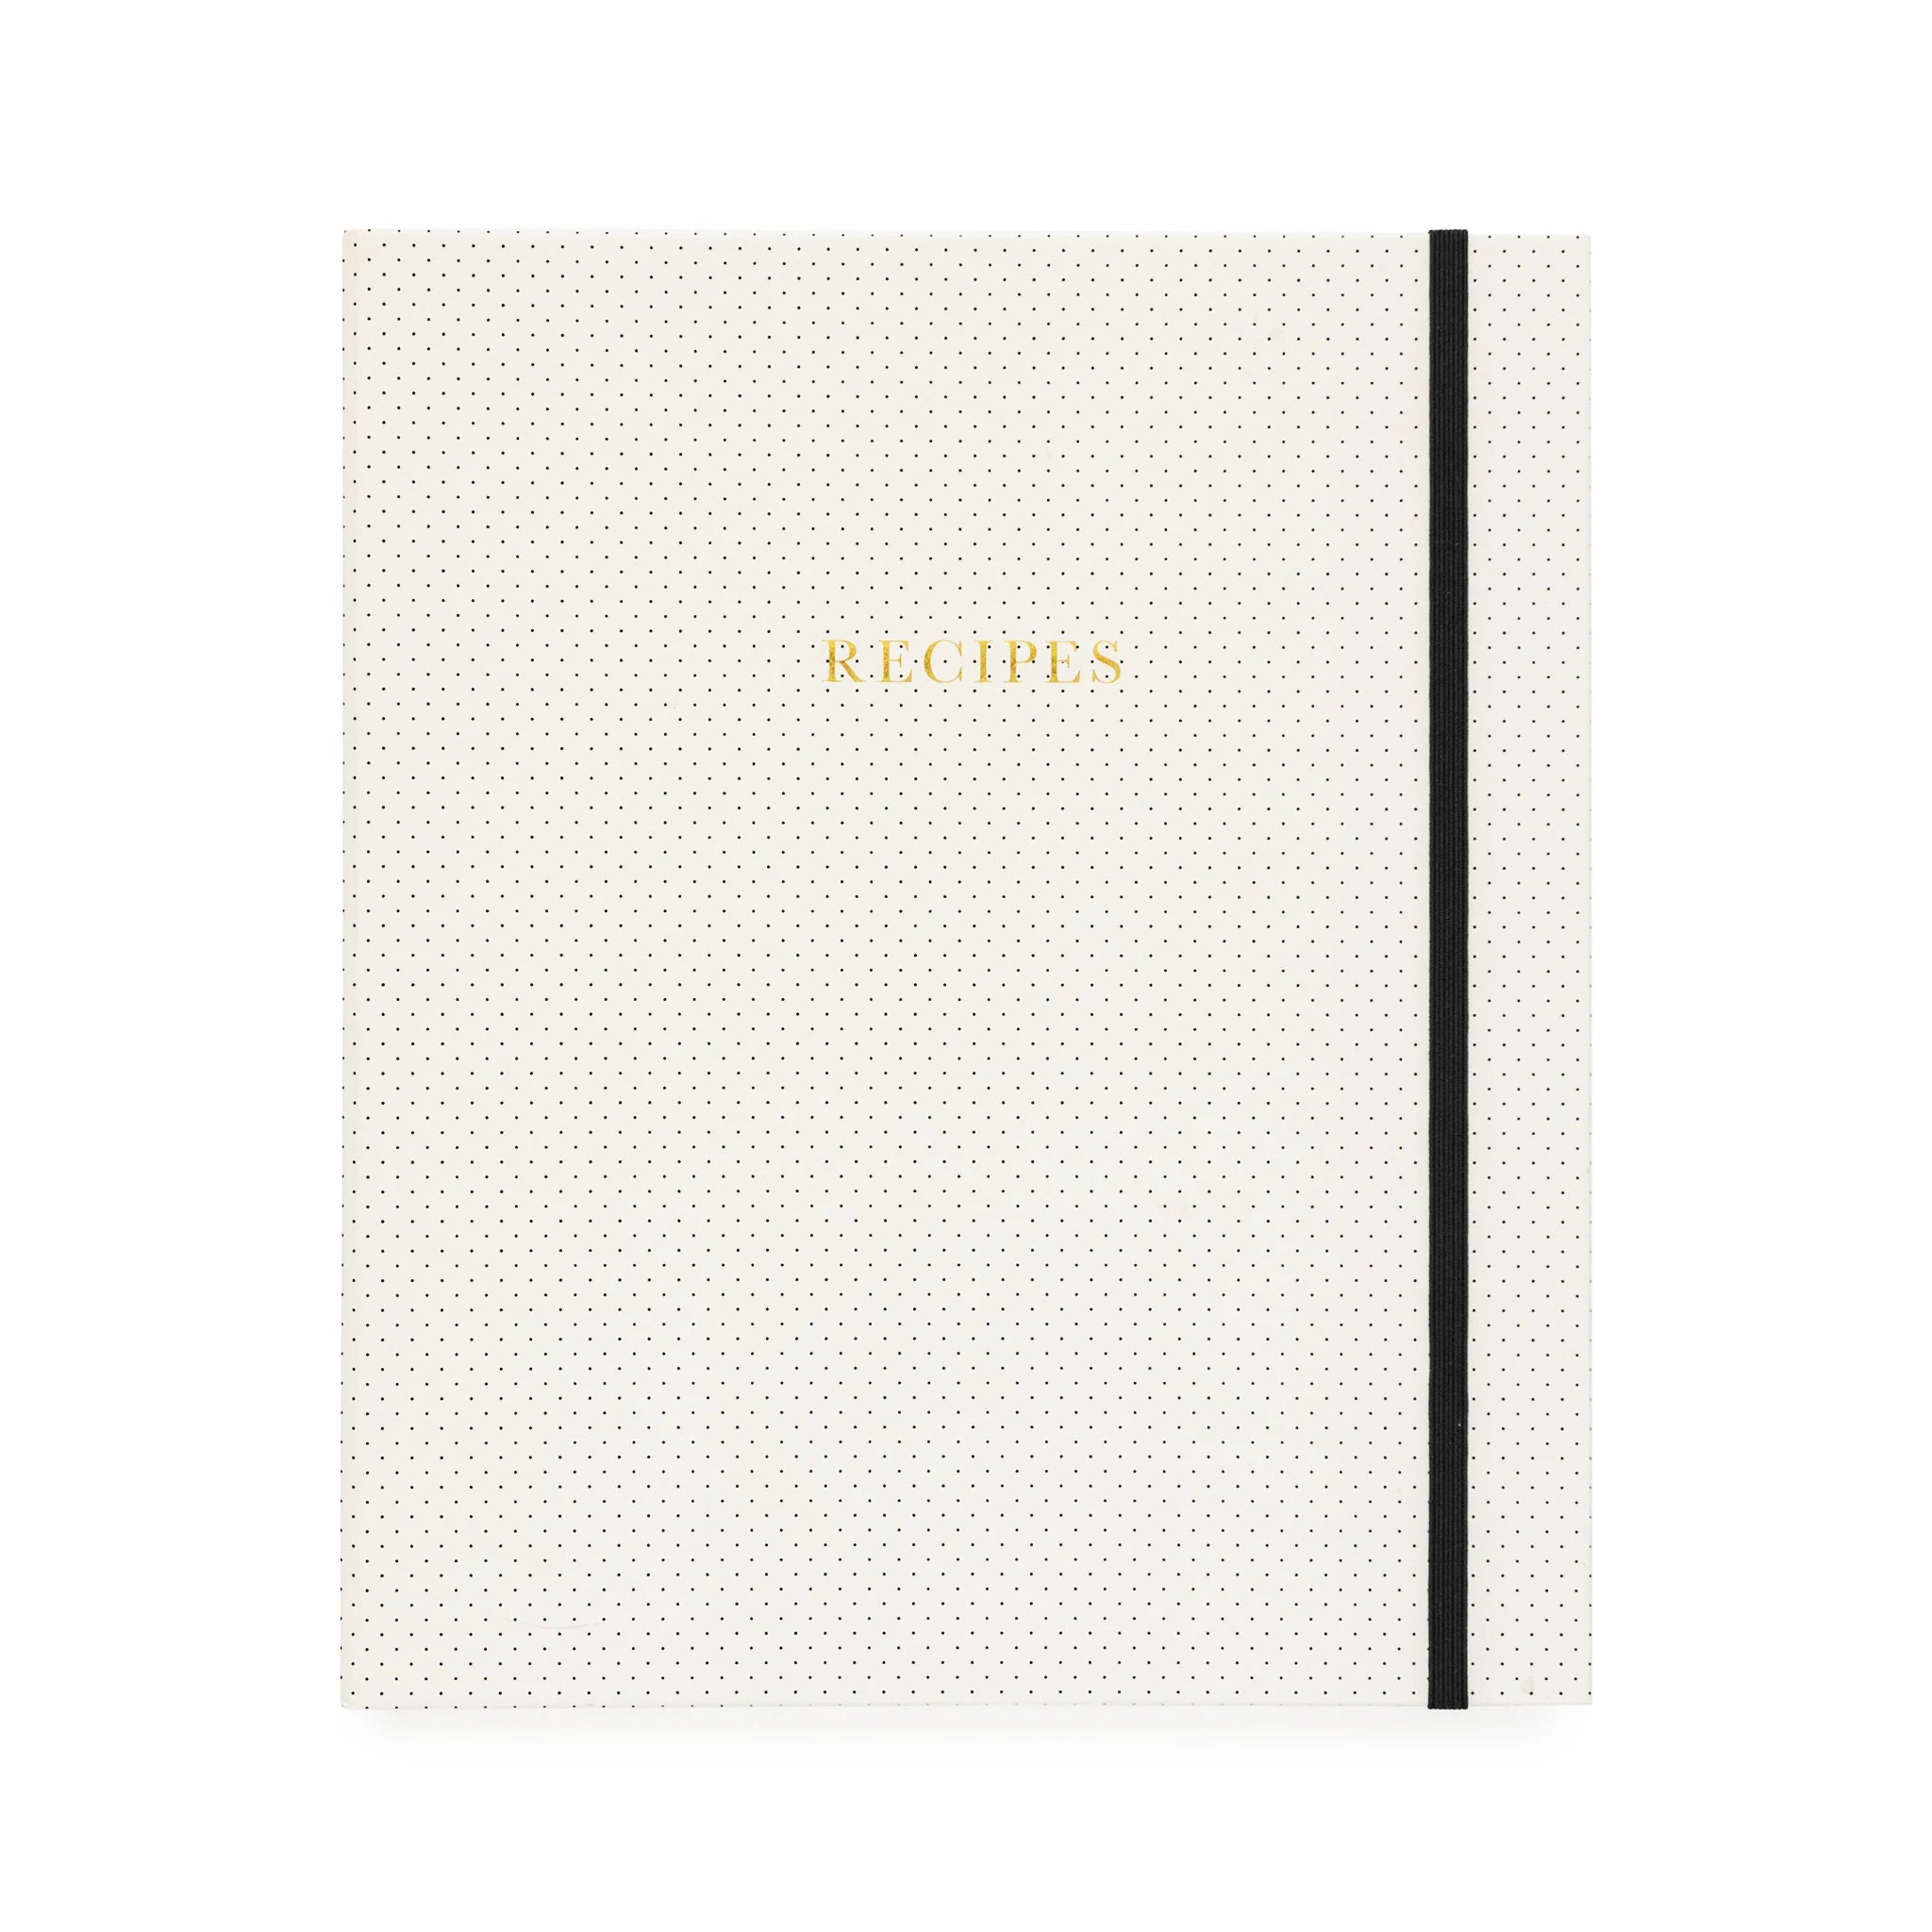 Spotted Recipe Book on white background